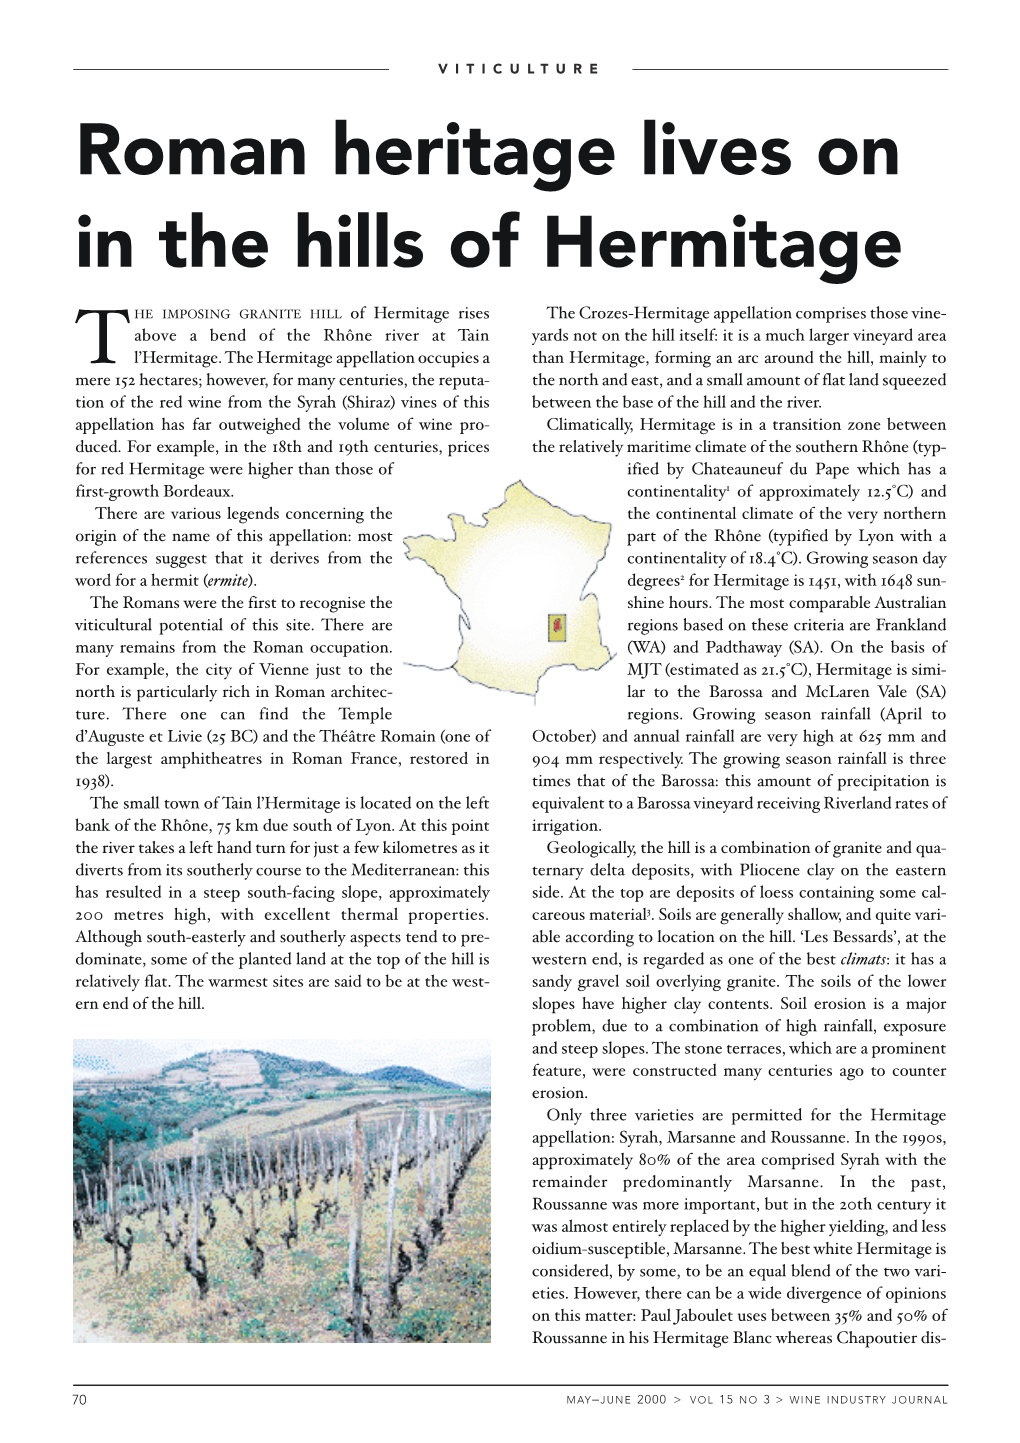 Roman Heritage Lives on in the Hills of Hermitage